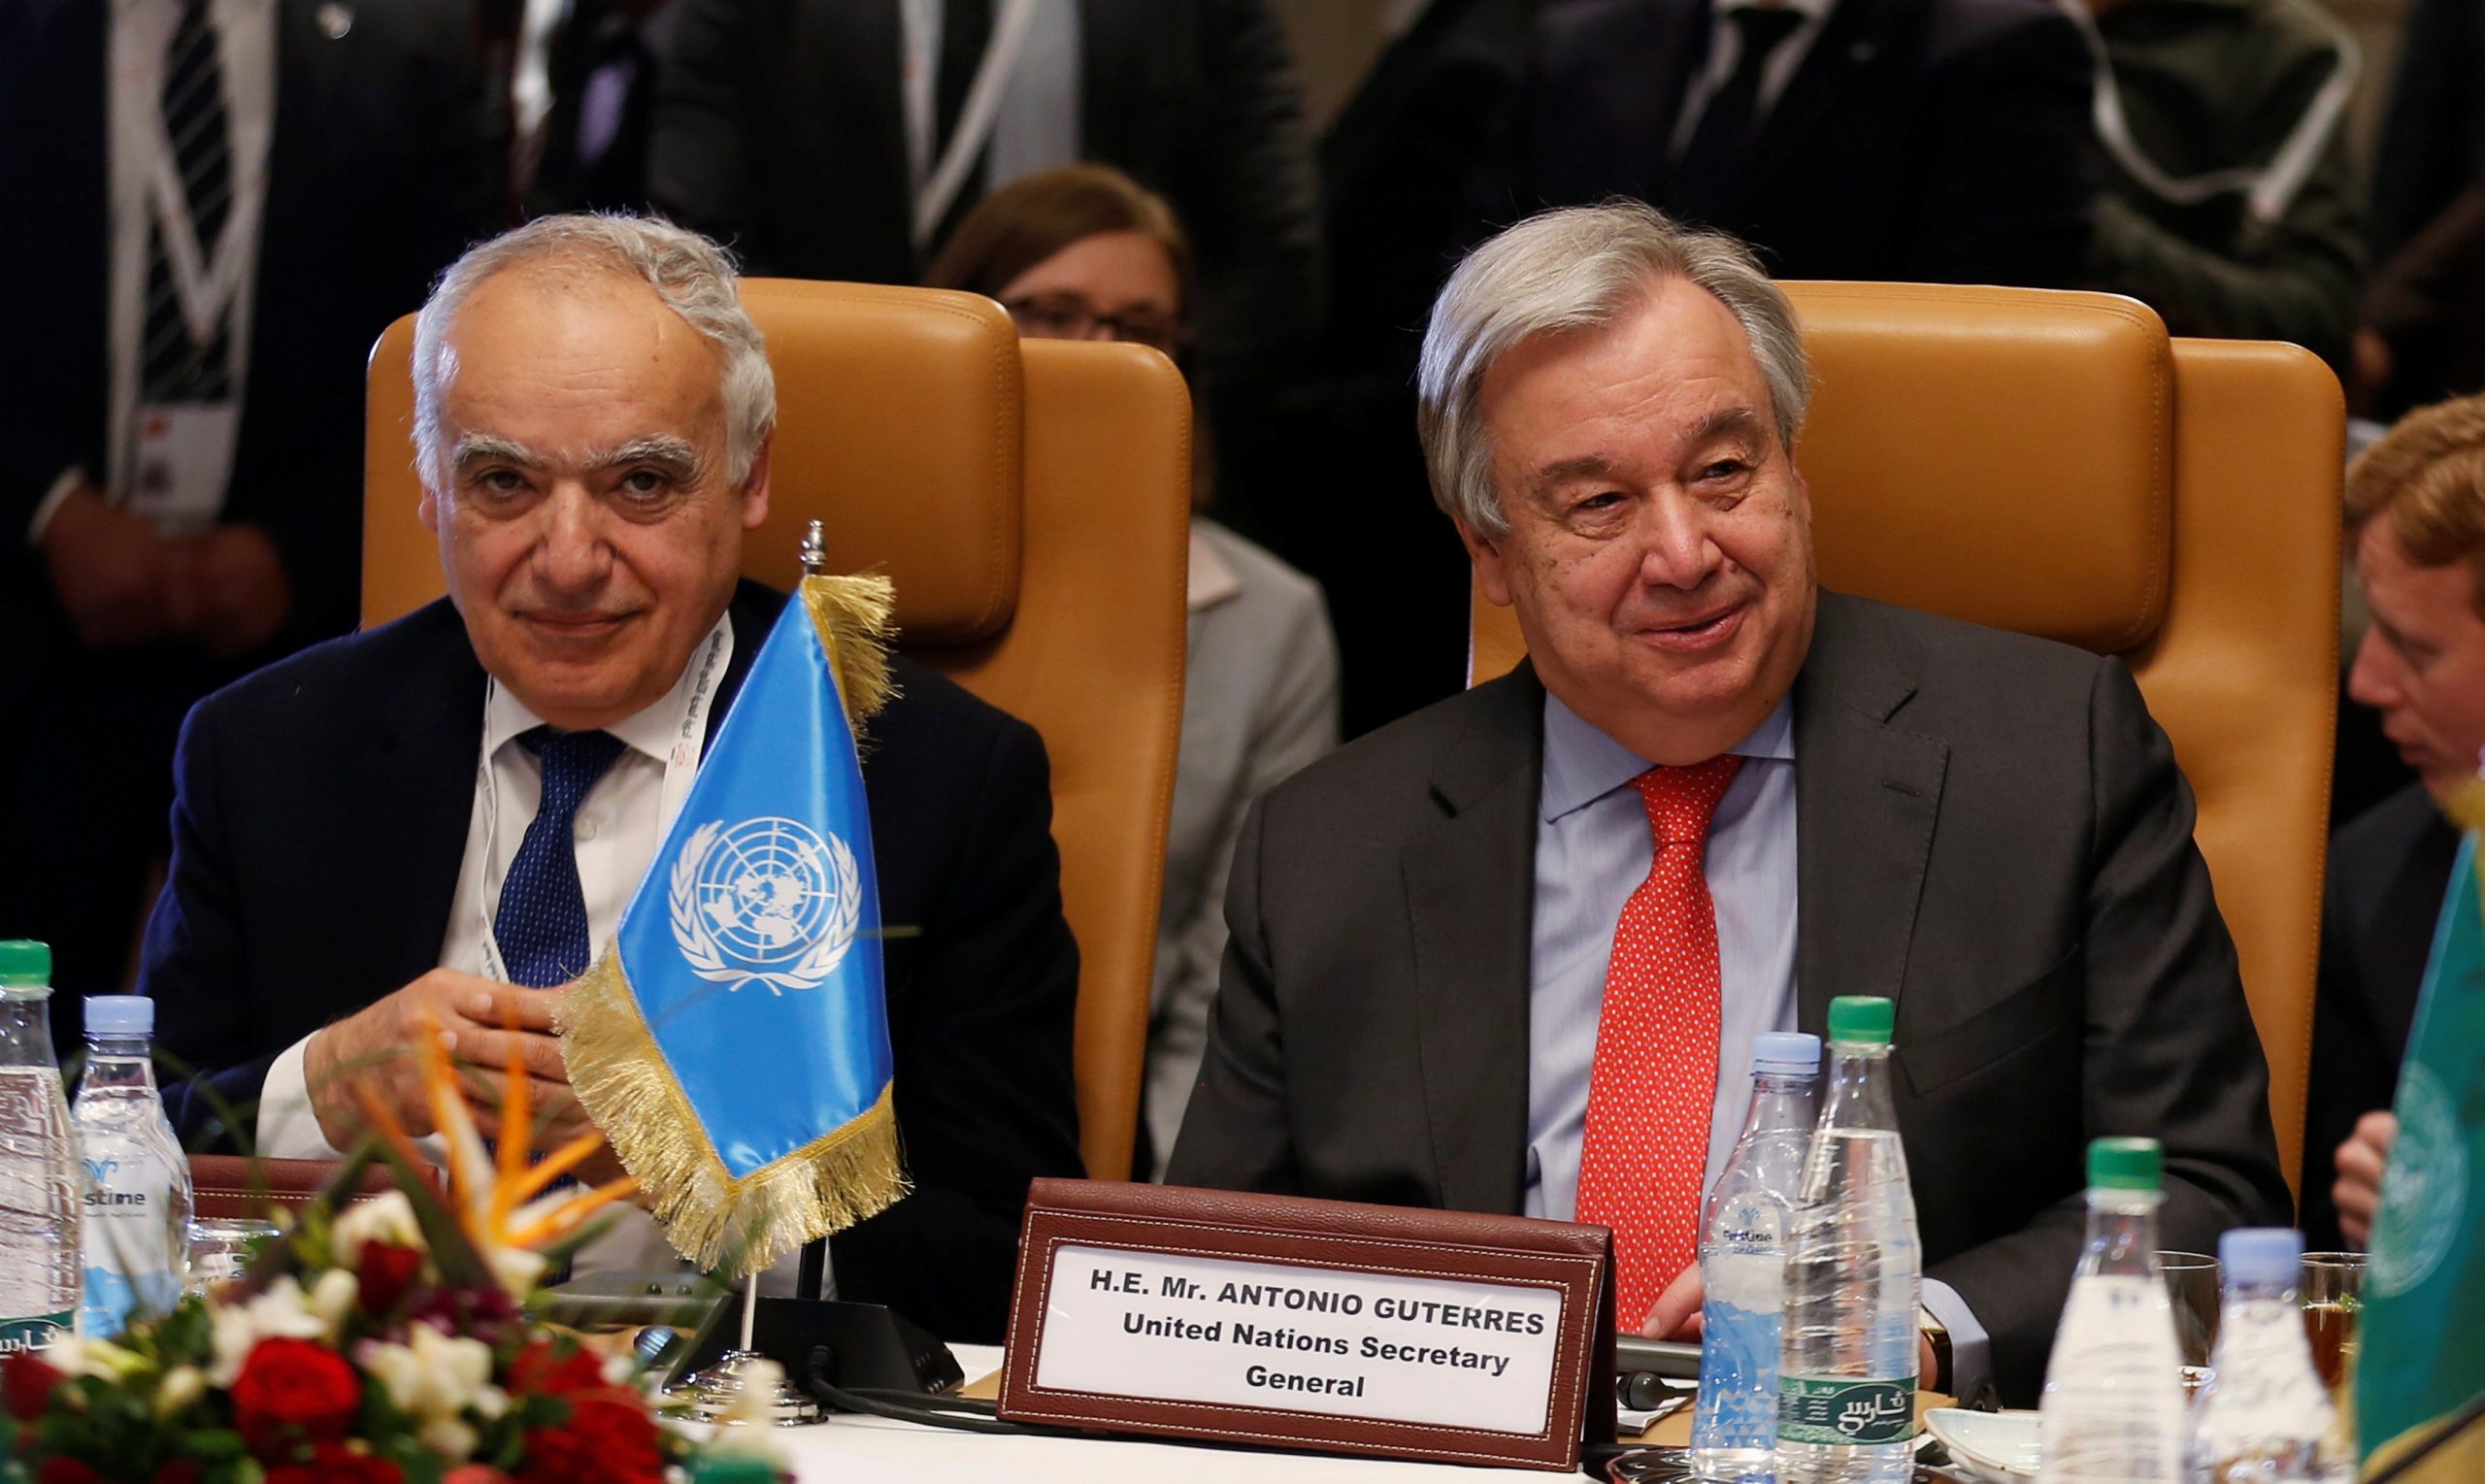 Secretary General of the United Nations Antonio Guterres and the U.N. Envoy for Libya, Ghassan Salame, durring a meeting in Tunis